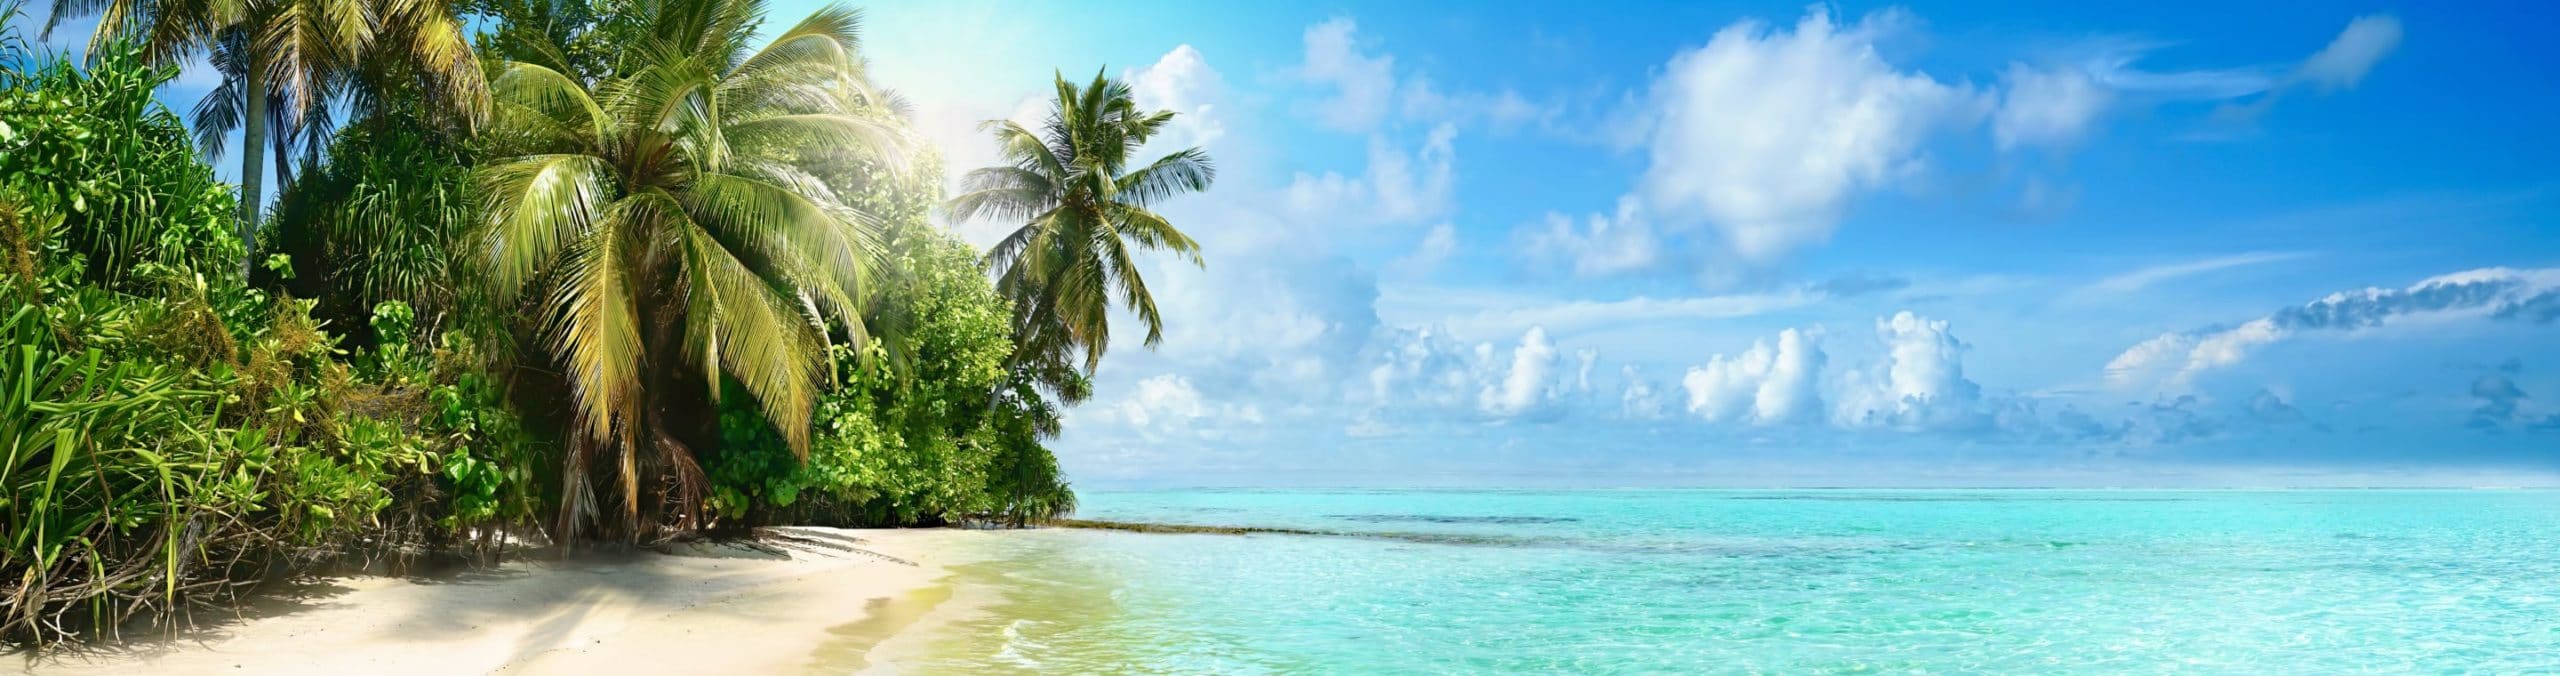 7 Deserted island books for an escape